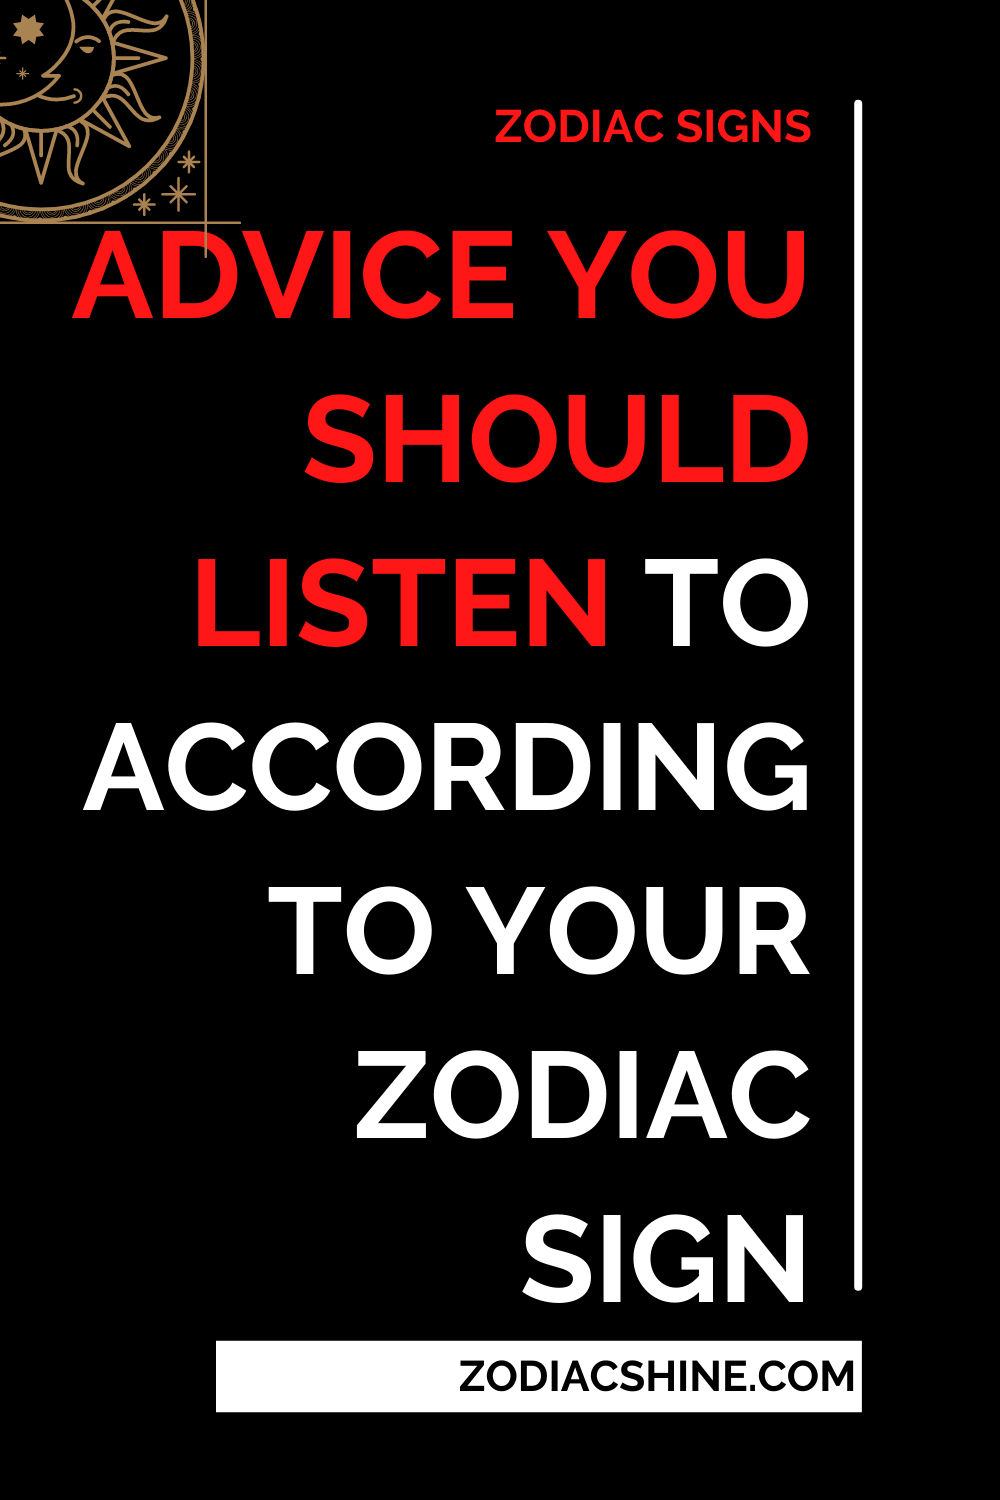 Advice You Should Listen To According To Your Zodiac Sign